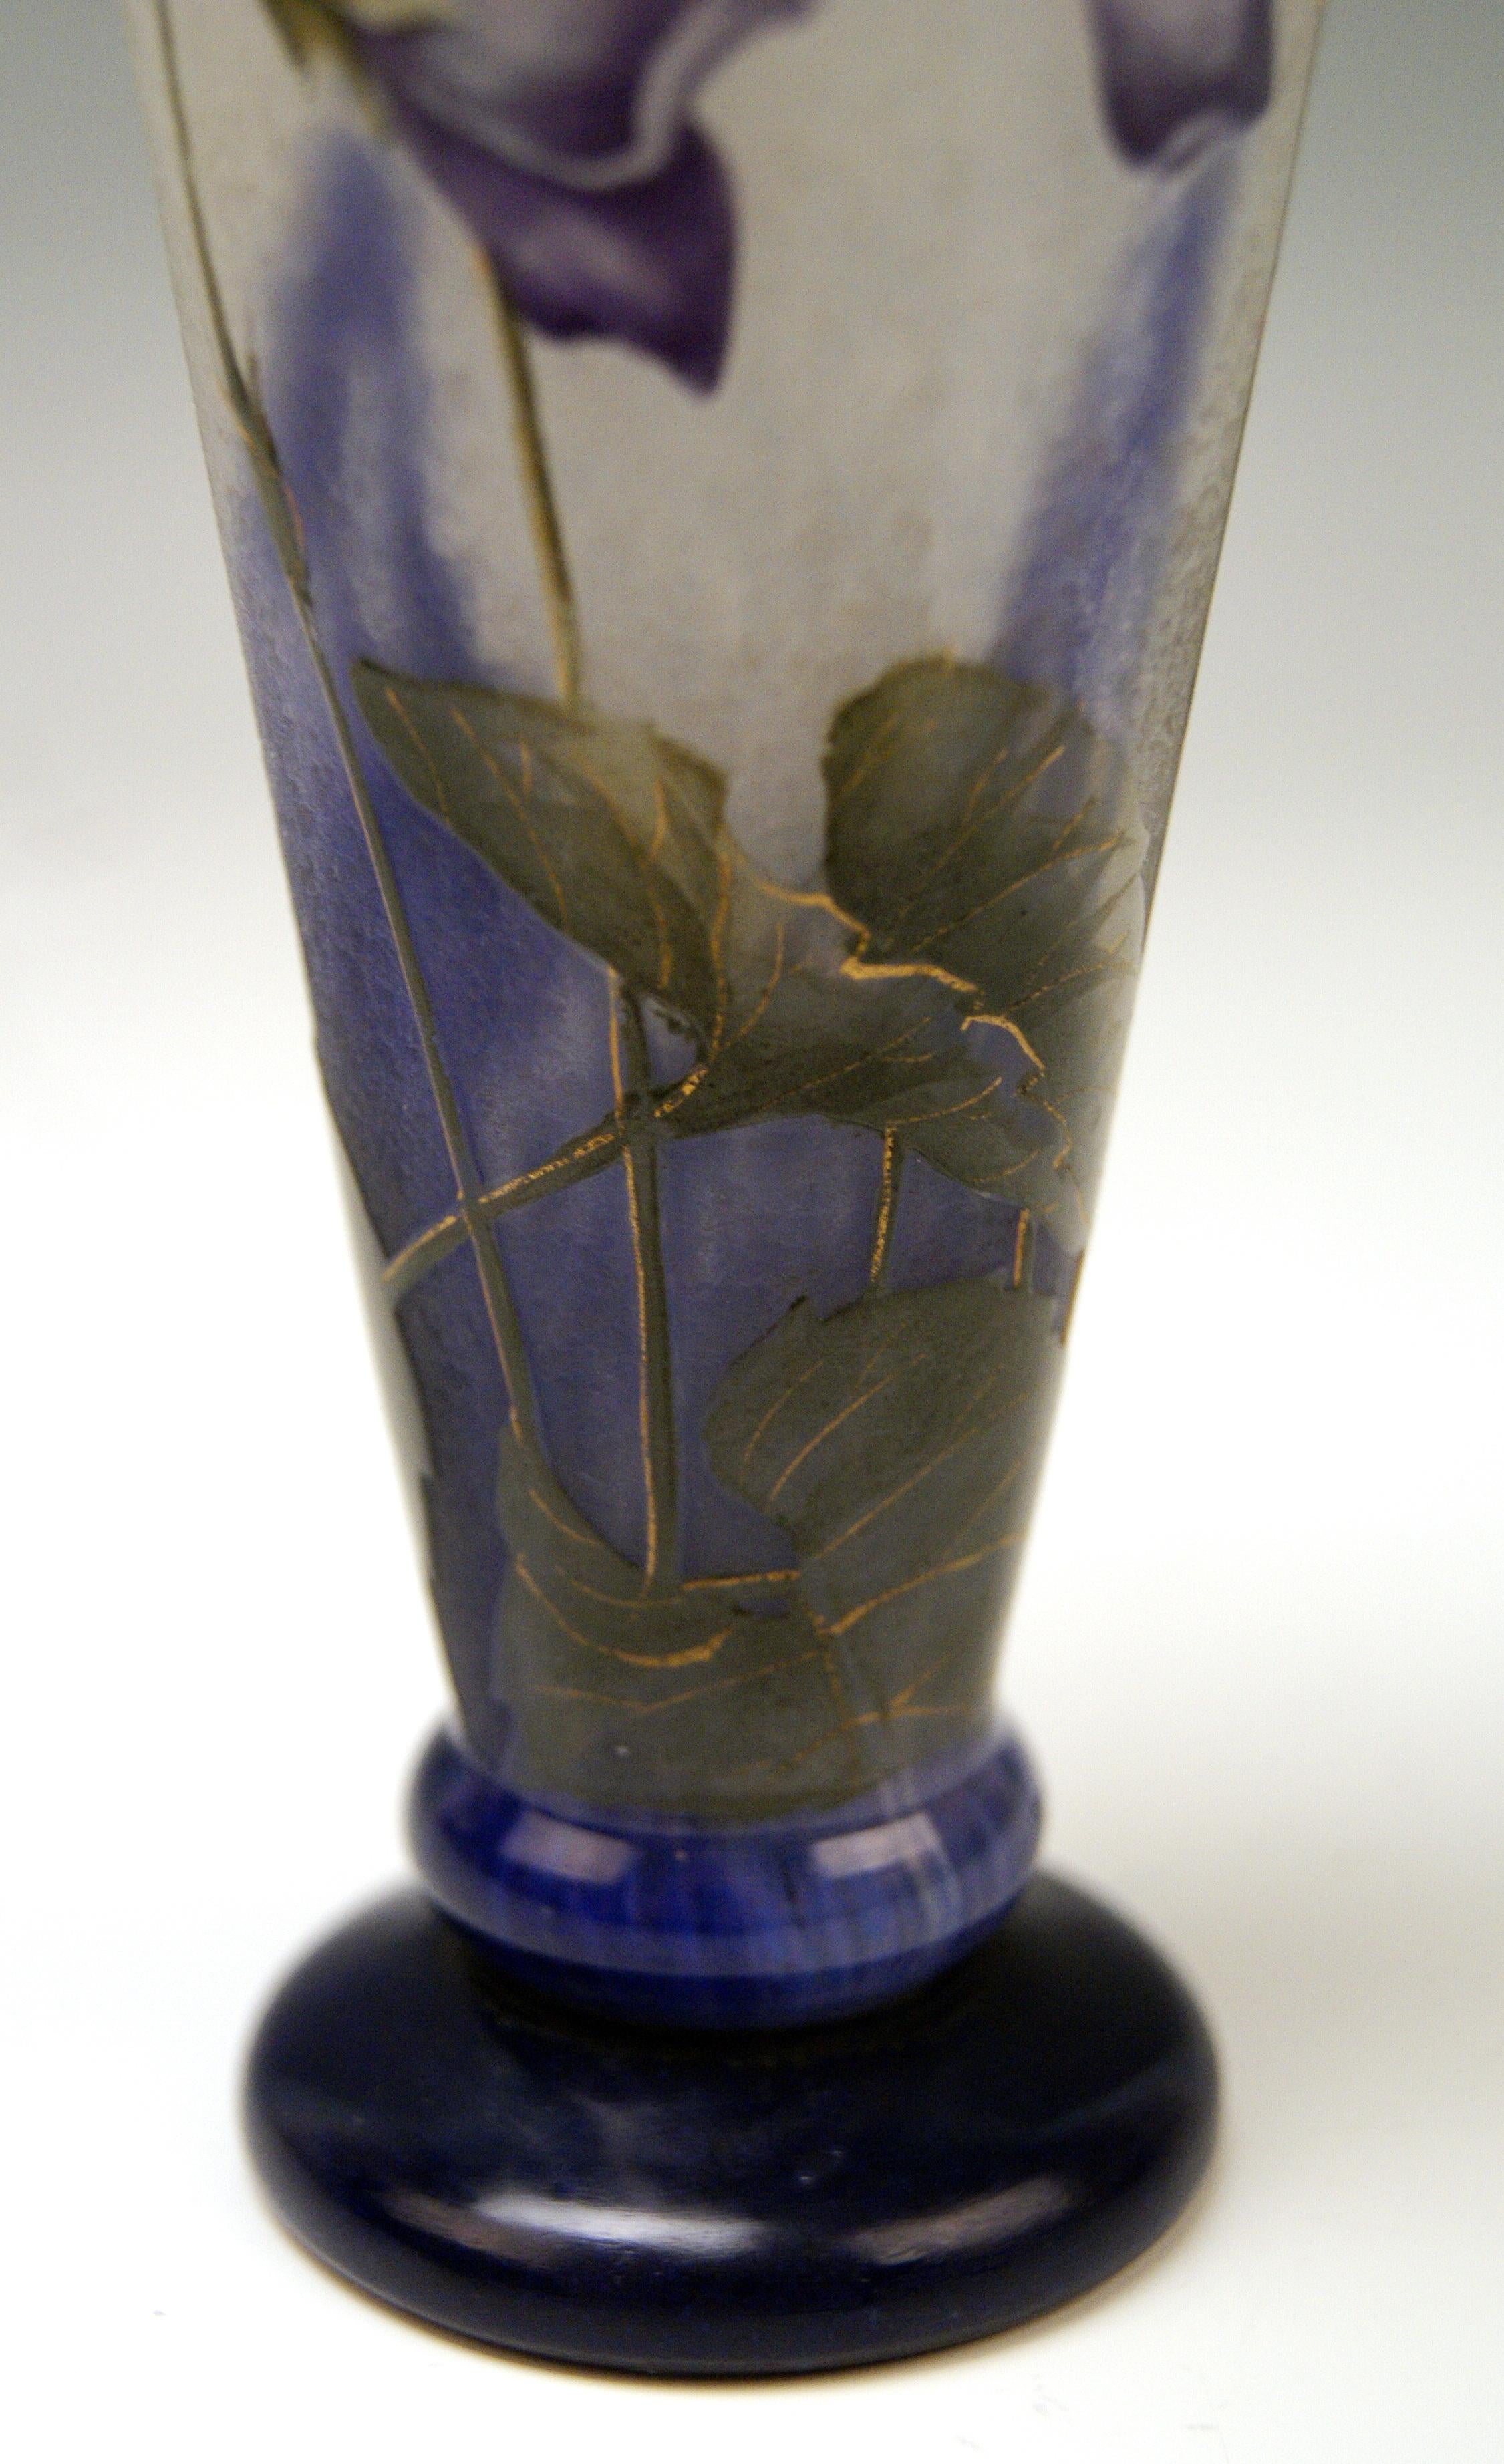 Etched Daum Nancy France Art Nouveau Early Vase with Violets Flowers Made, circa 1895